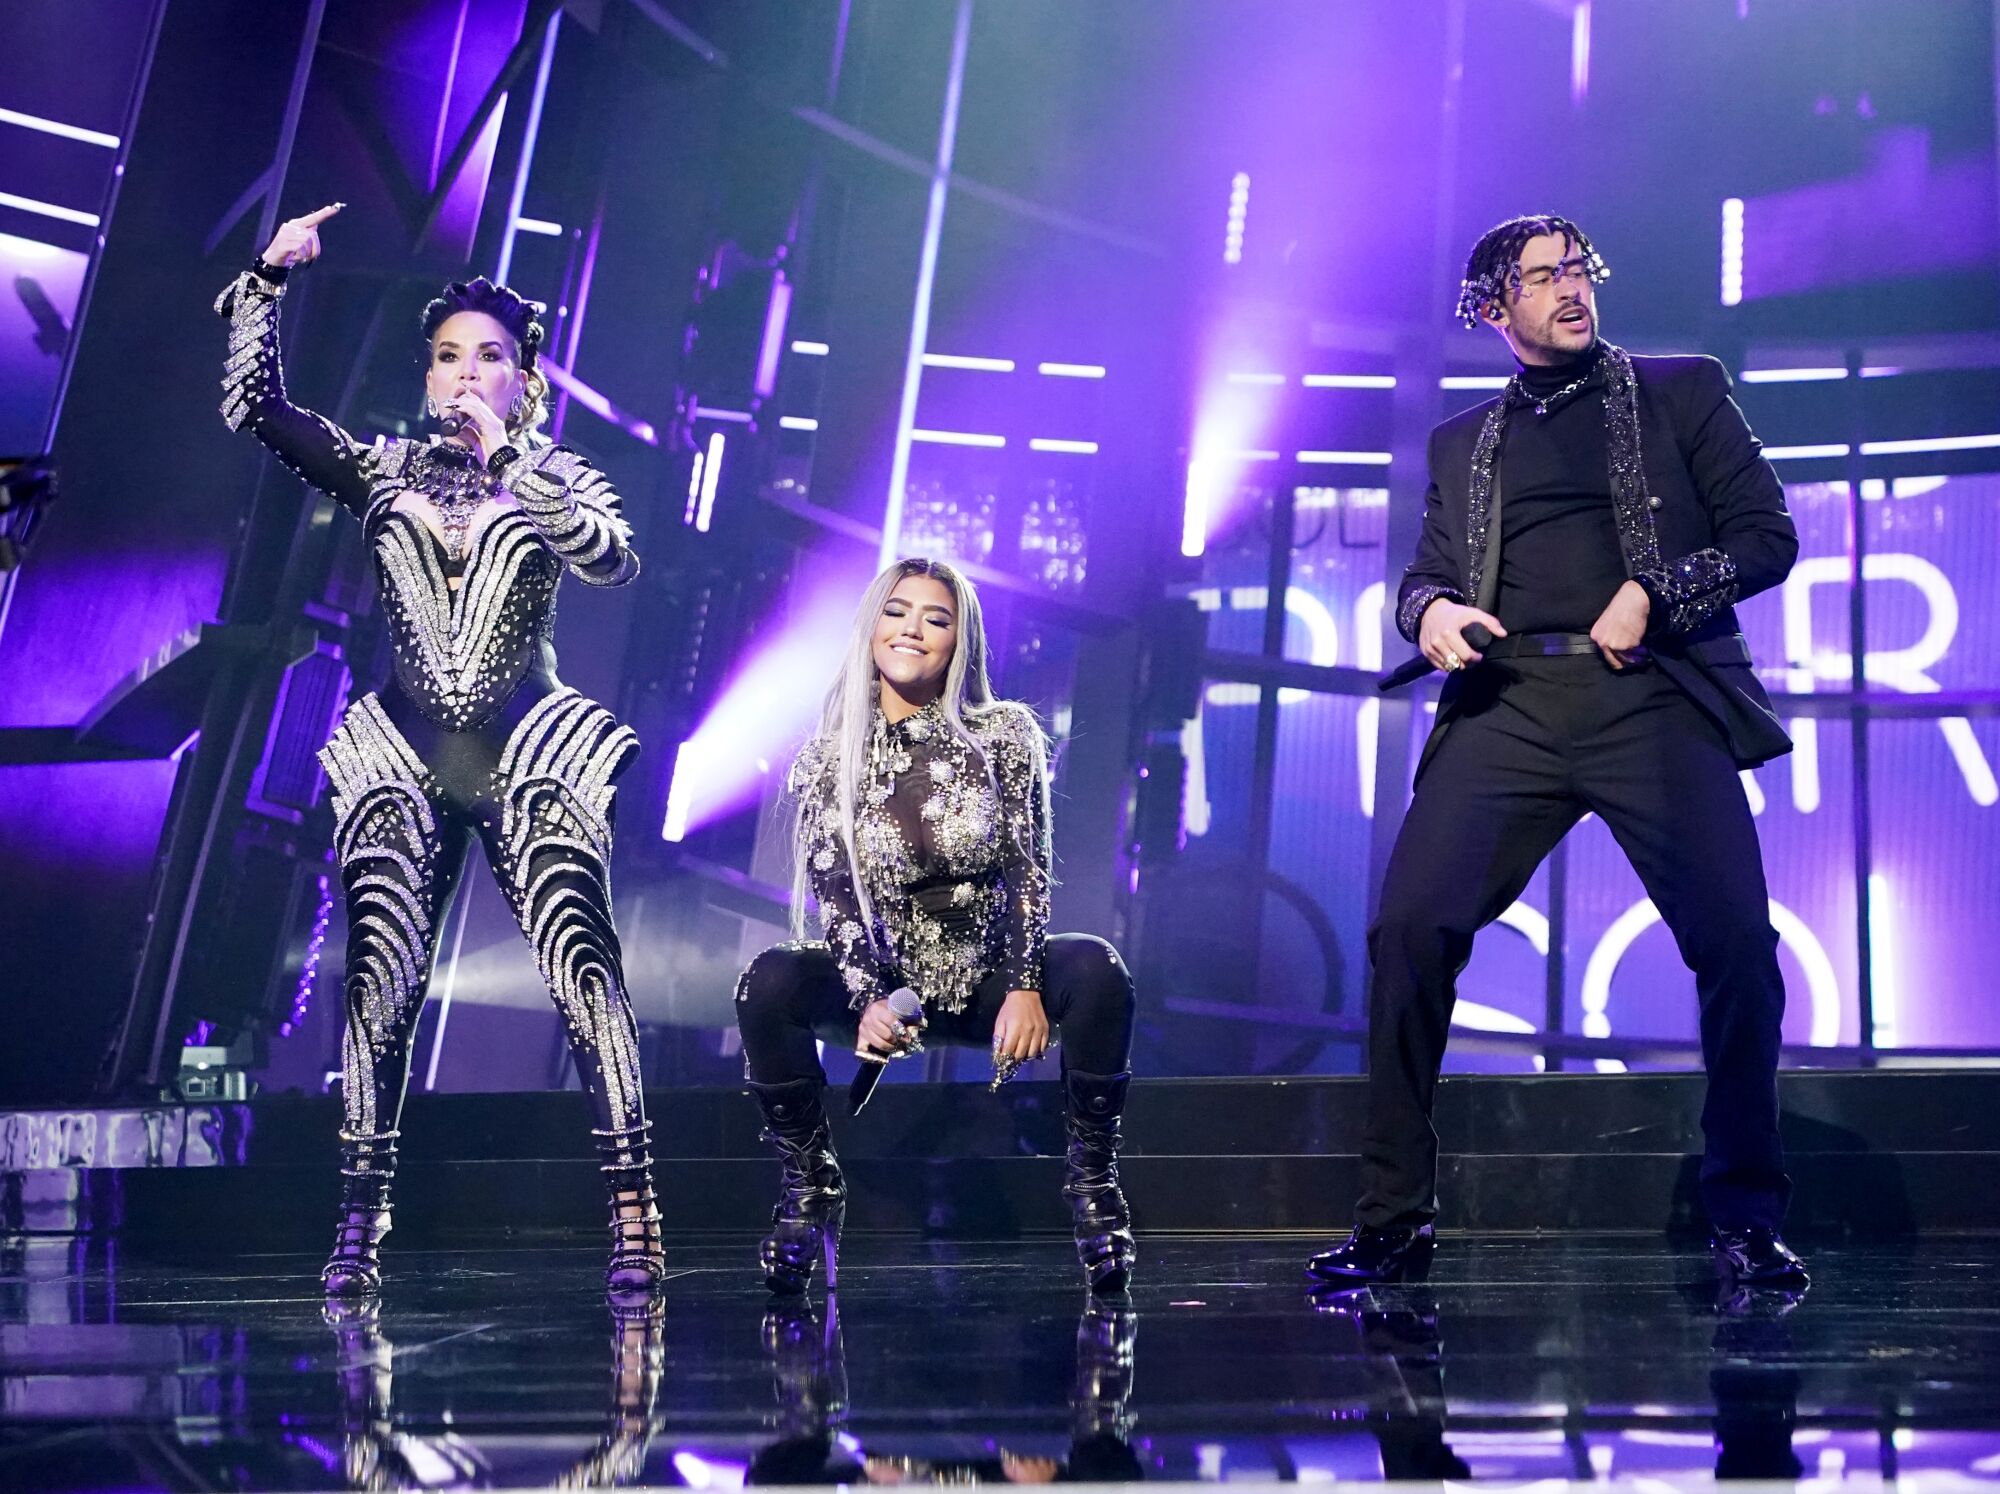  Ivy Queen, Nesi and Bad Bunny, in silver and black, perform on stage. 